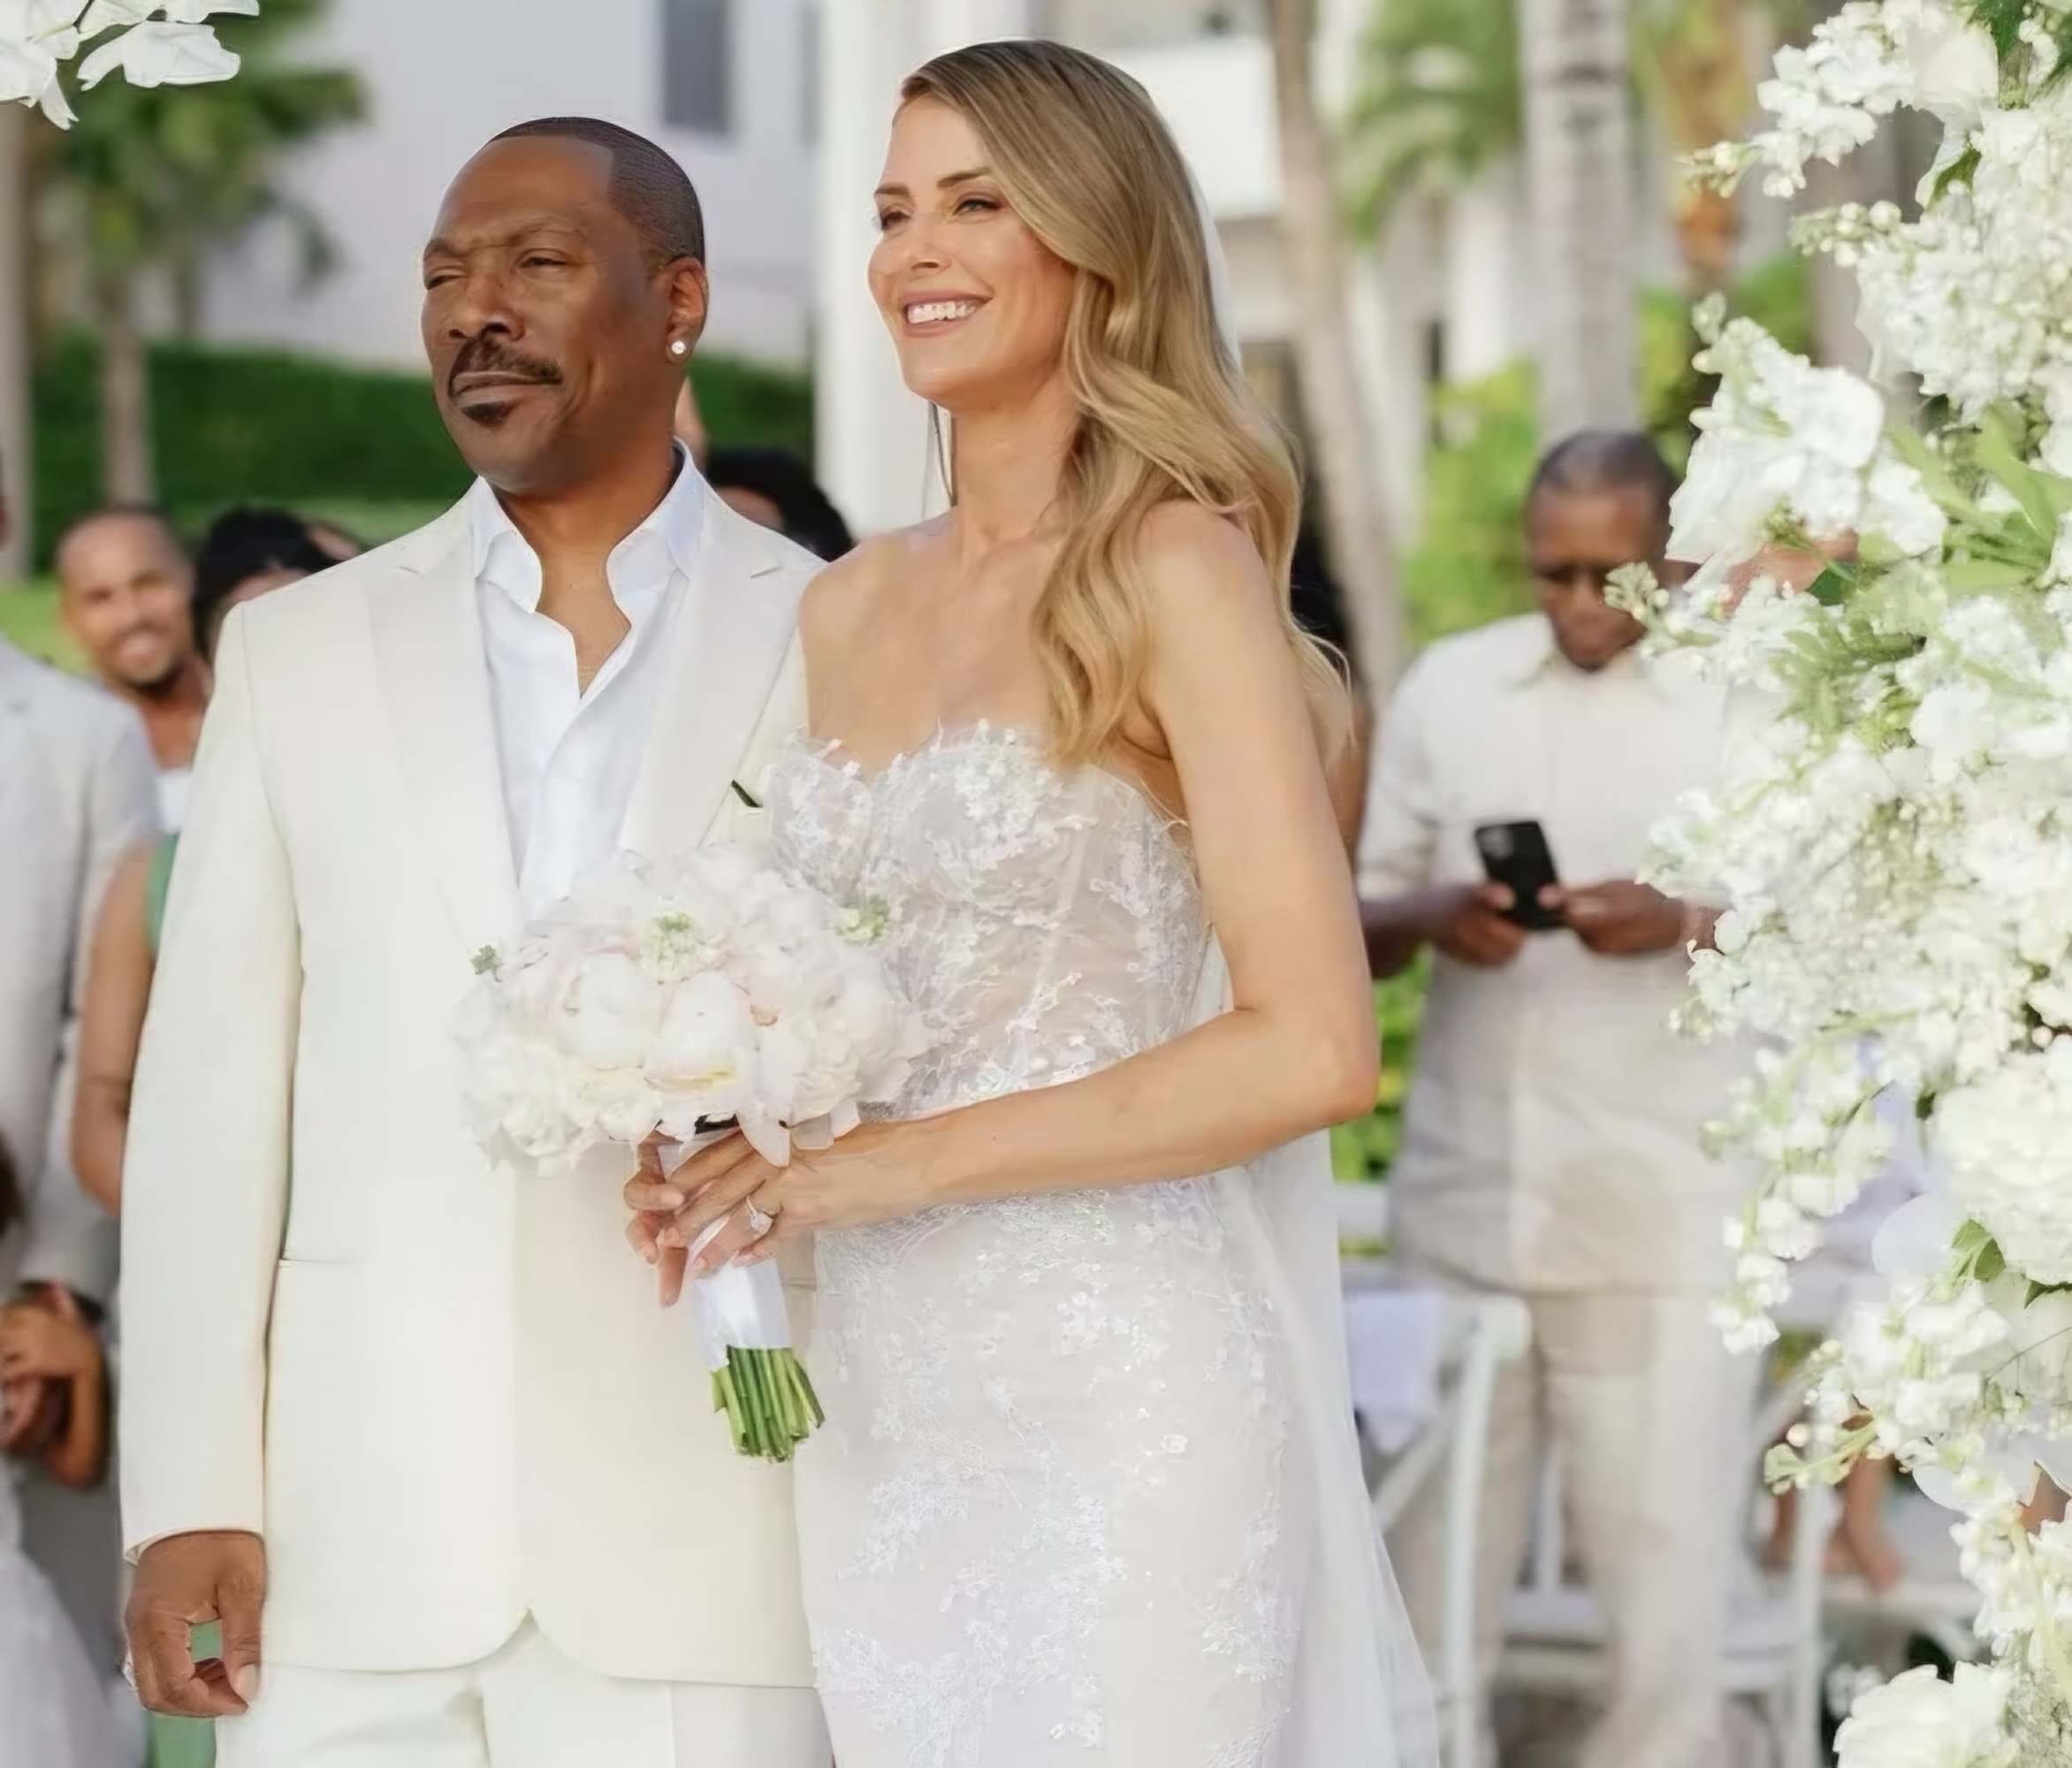 Eddie Murphy Marries Paige Butcher in Private Caribbean Ceremony